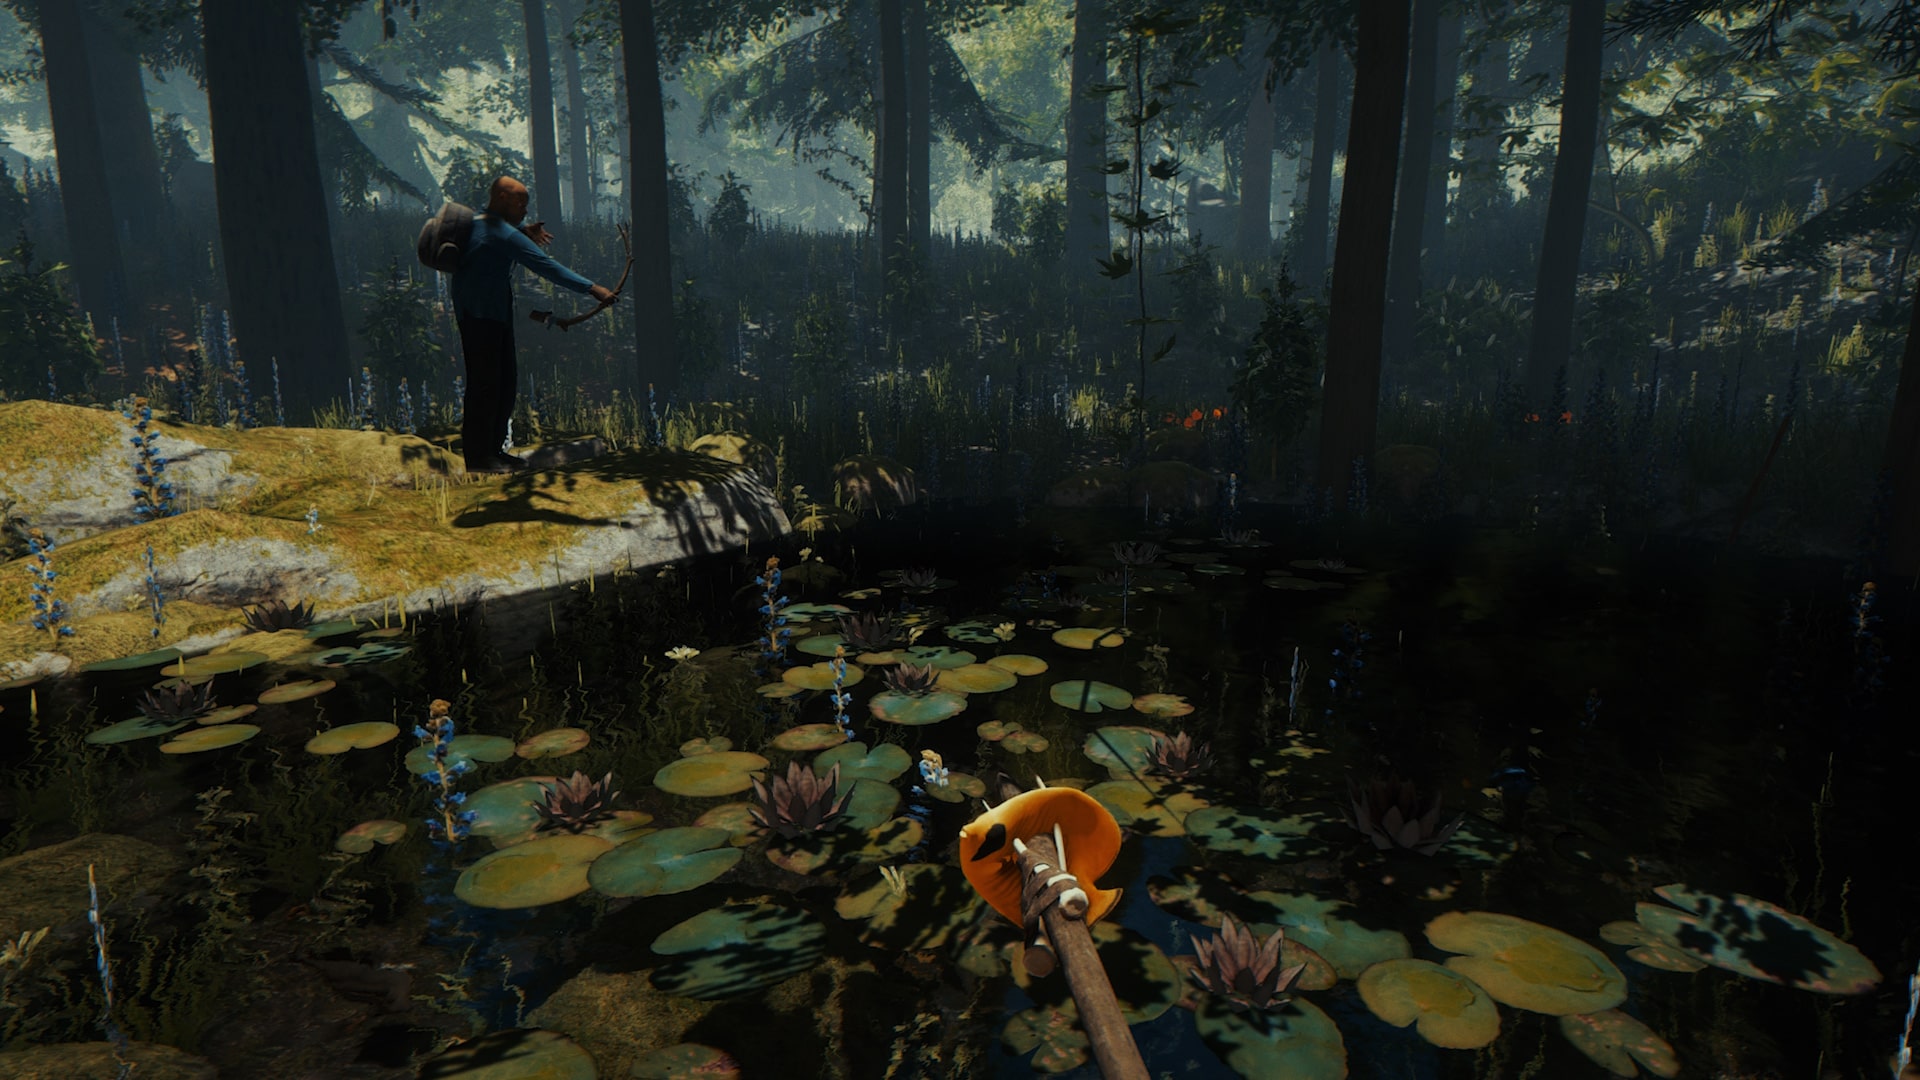 The Forest 2 Release Date is NEEDED ASAP! (The Forest 2 Gameplay PS5,XBOX,PC,PS4)  